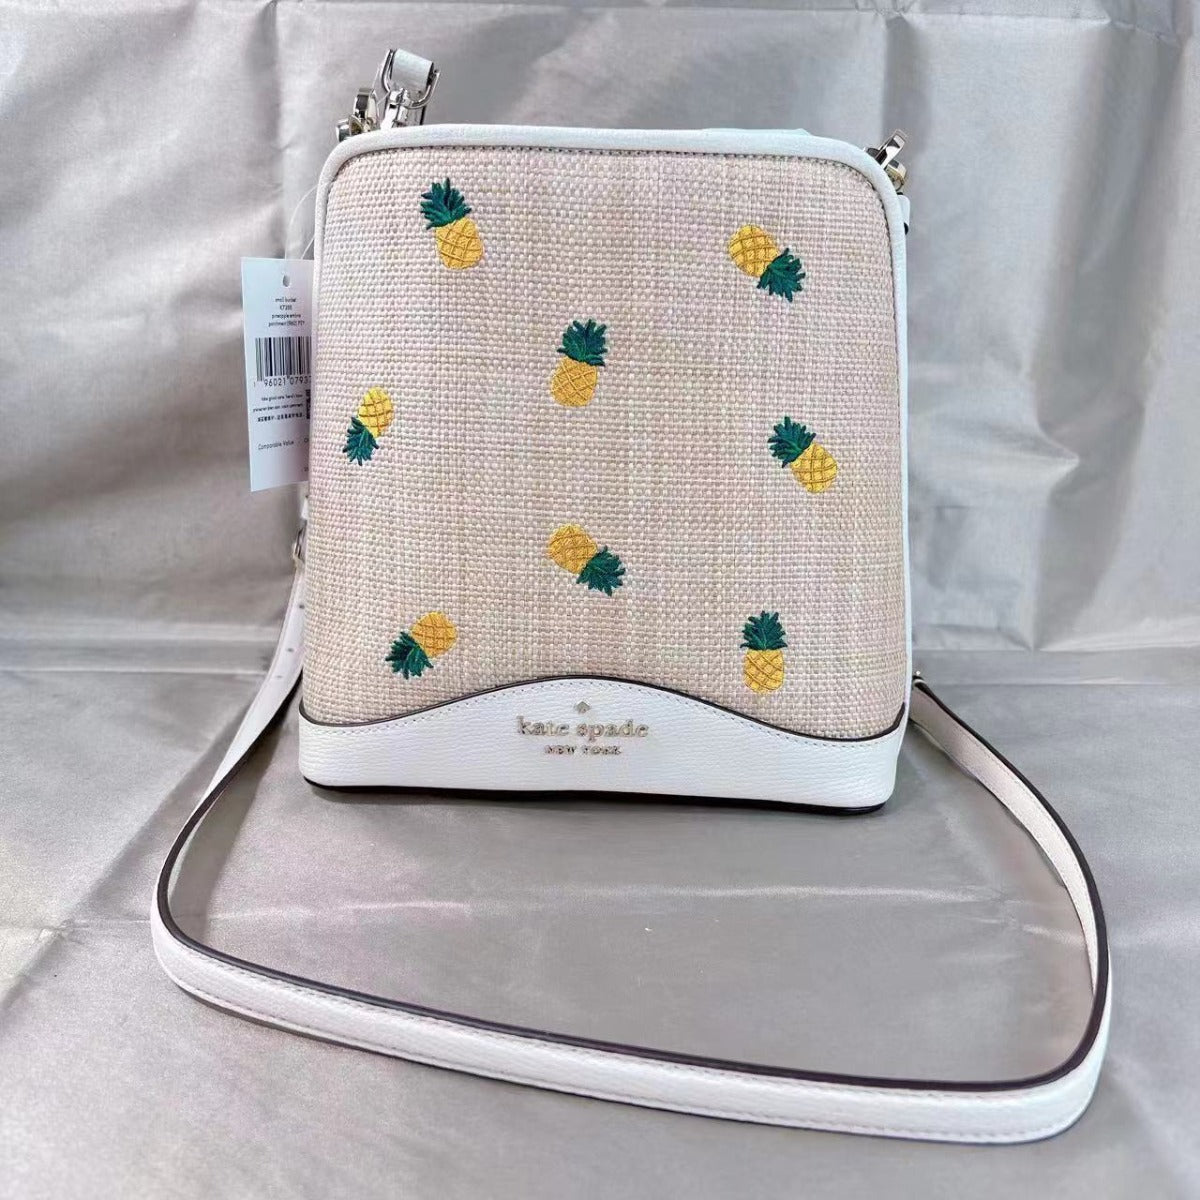 Kate Spade k7288 darcy small pineapple bucket bag in parchment multi